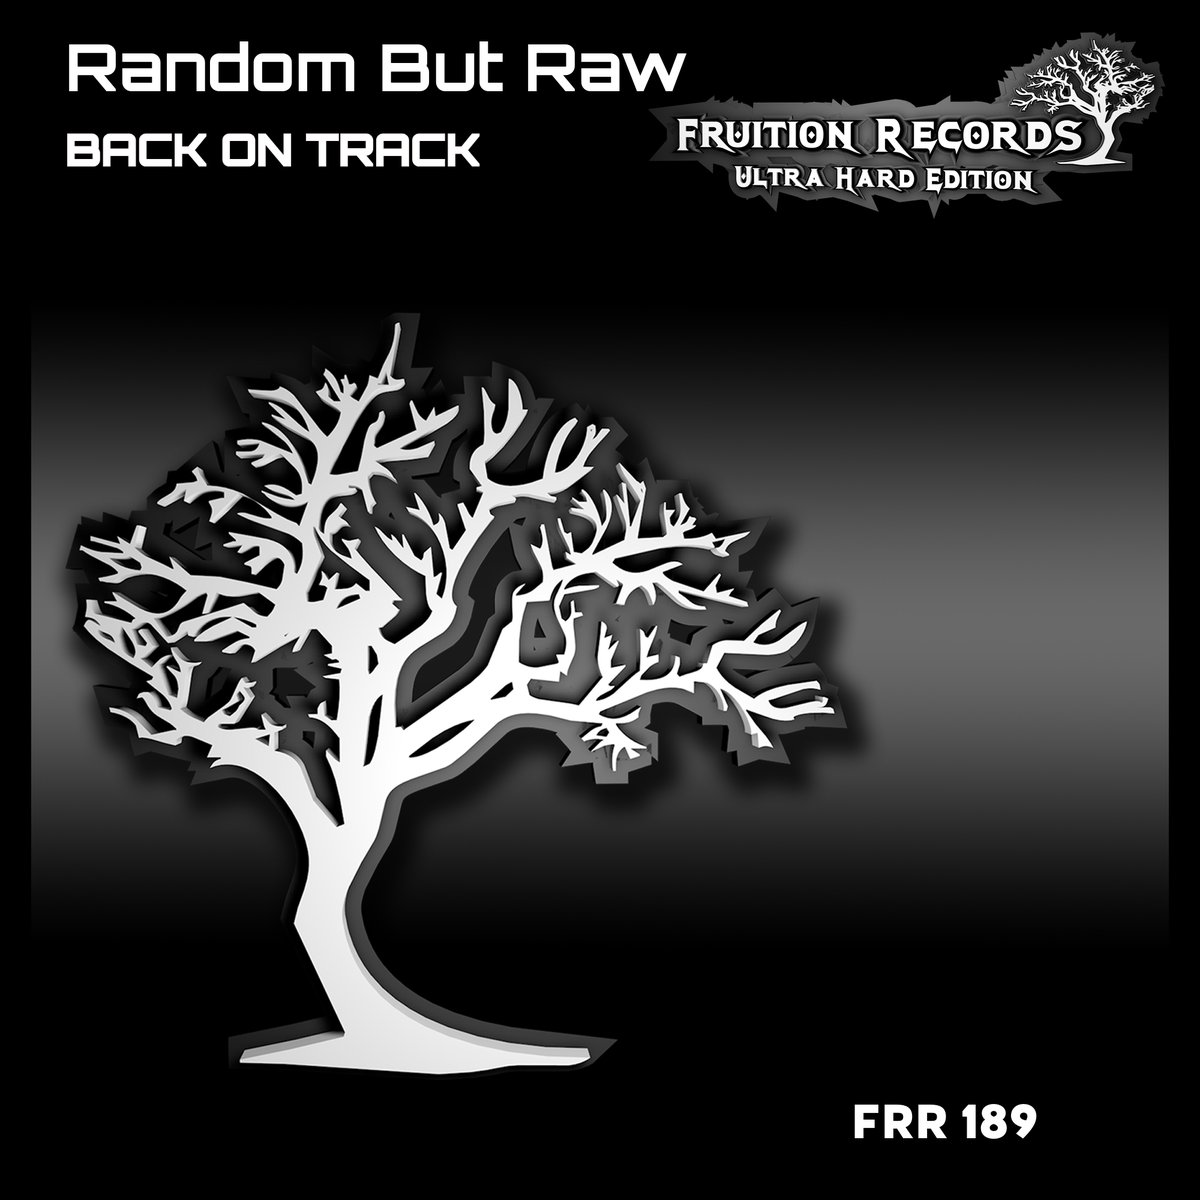 The latest Fruition Reccords release 'Back On Track' from Random But Raw is out now. Check it out here along with the labels other releases: bit.ly/backontrackfru… #hardhouse #harddance #toolboxdigital #newrelease #newmusic #fruitionrecords